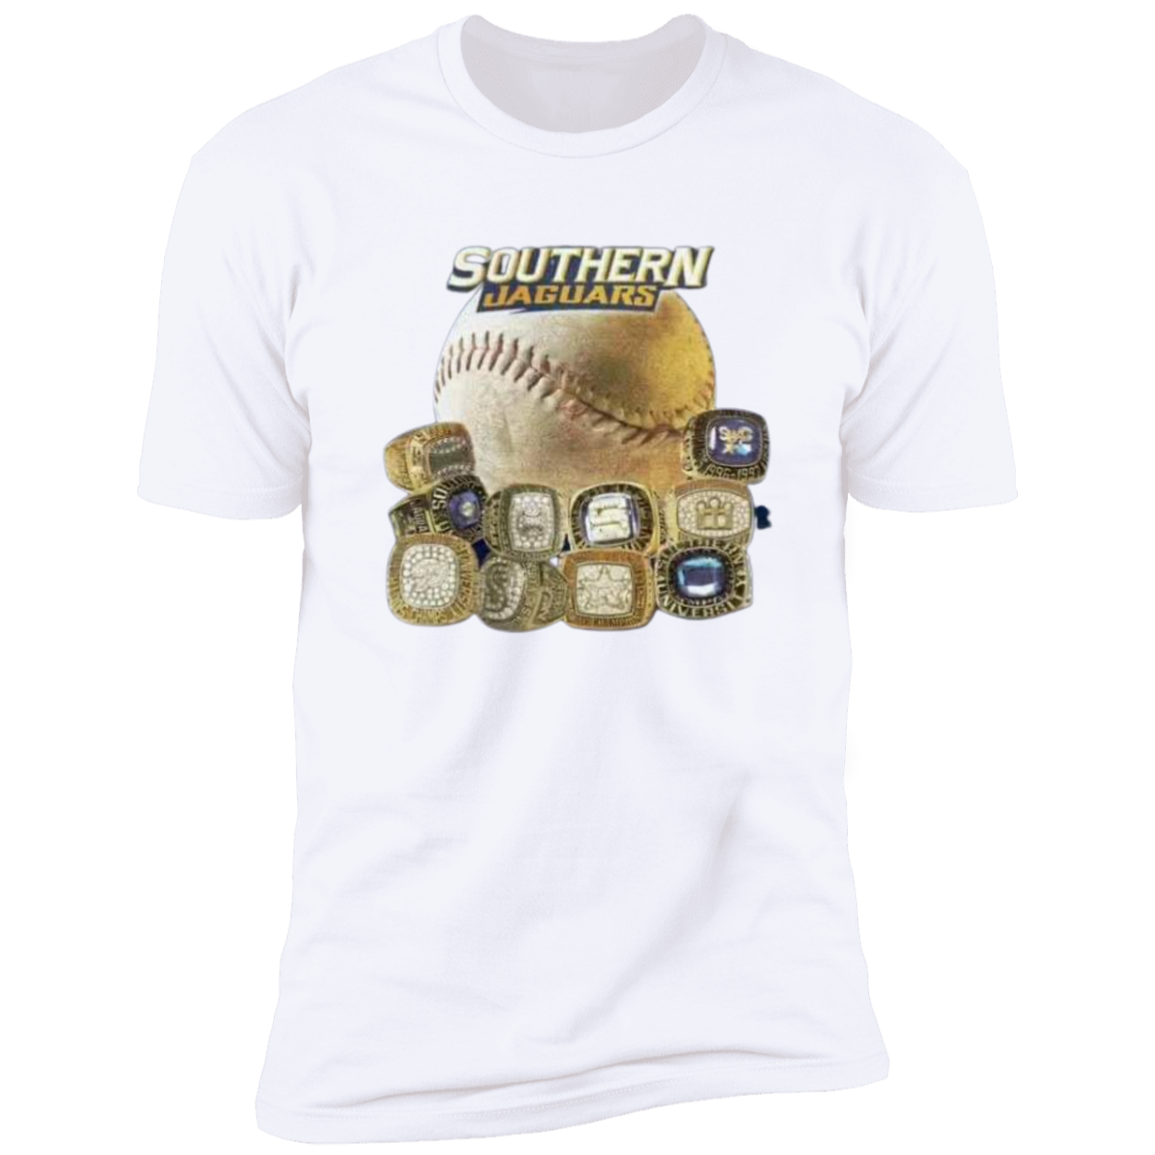 SU Baseball SWAC (Southern Wins Another Championship)  Rings  Z61x Premium Short Sleeve Tee (Closeout)